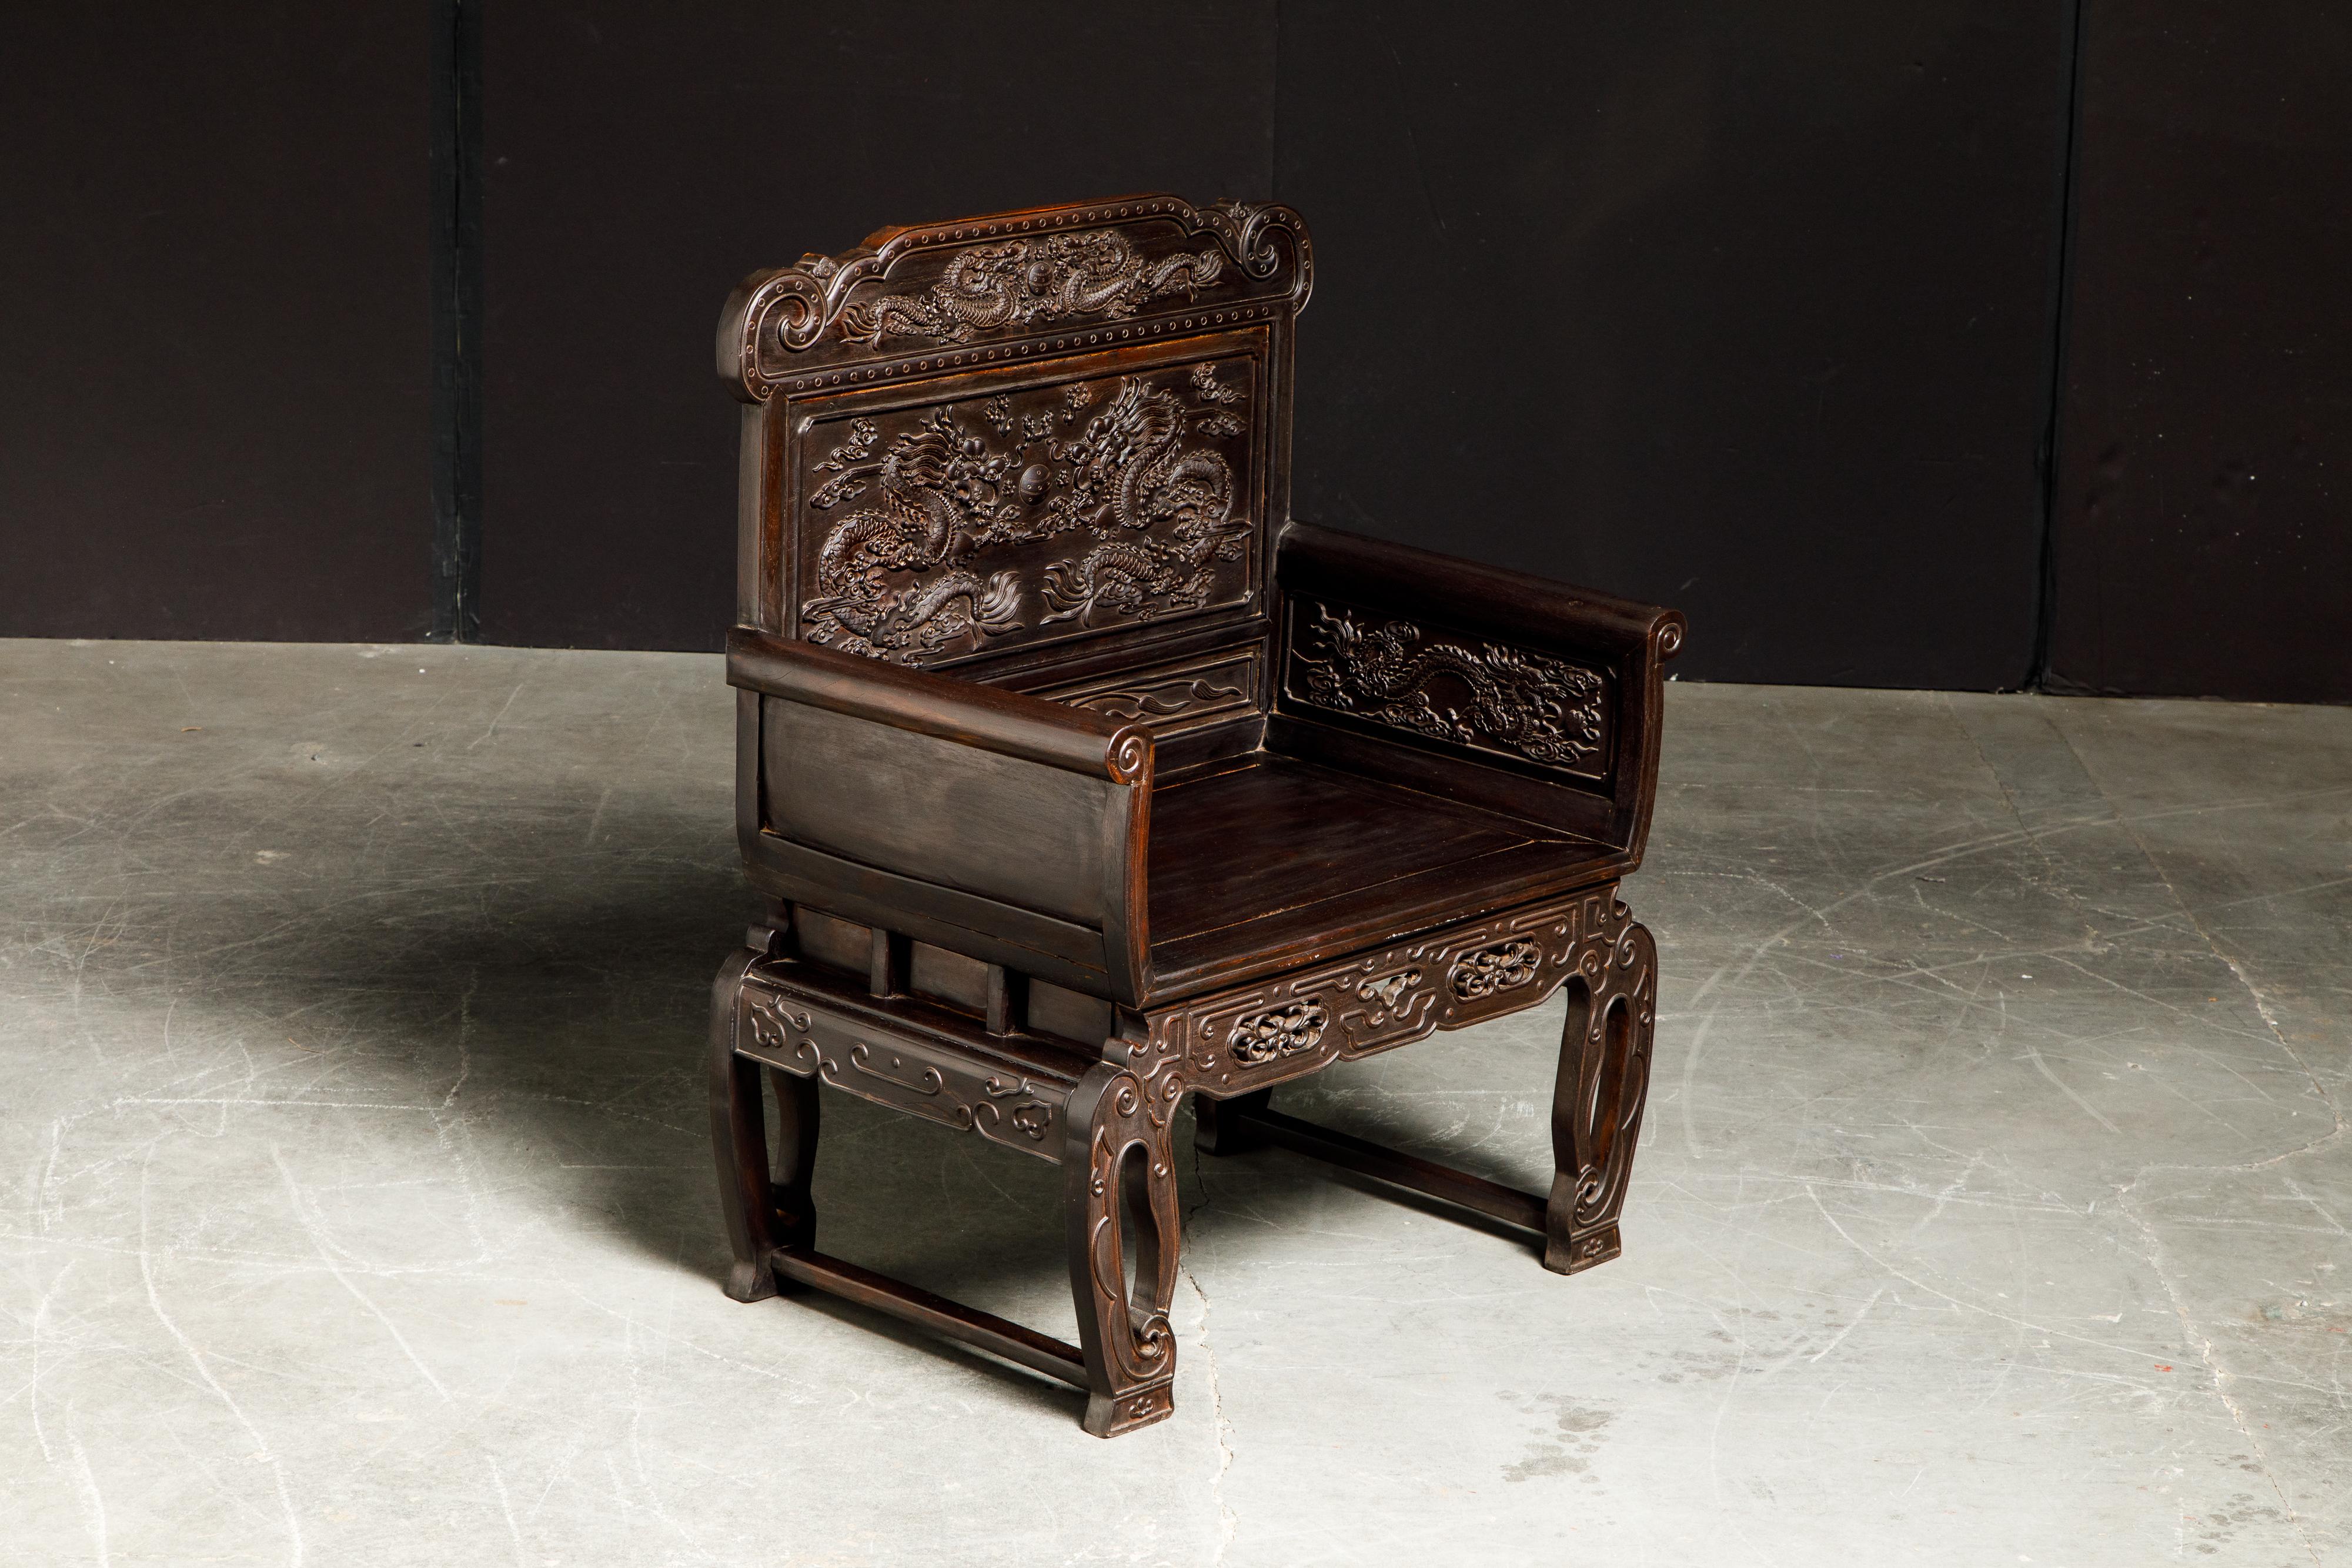 Chinese Export Pair of Carved Chinese Zitan Throne Chairs with Dragon Motifs